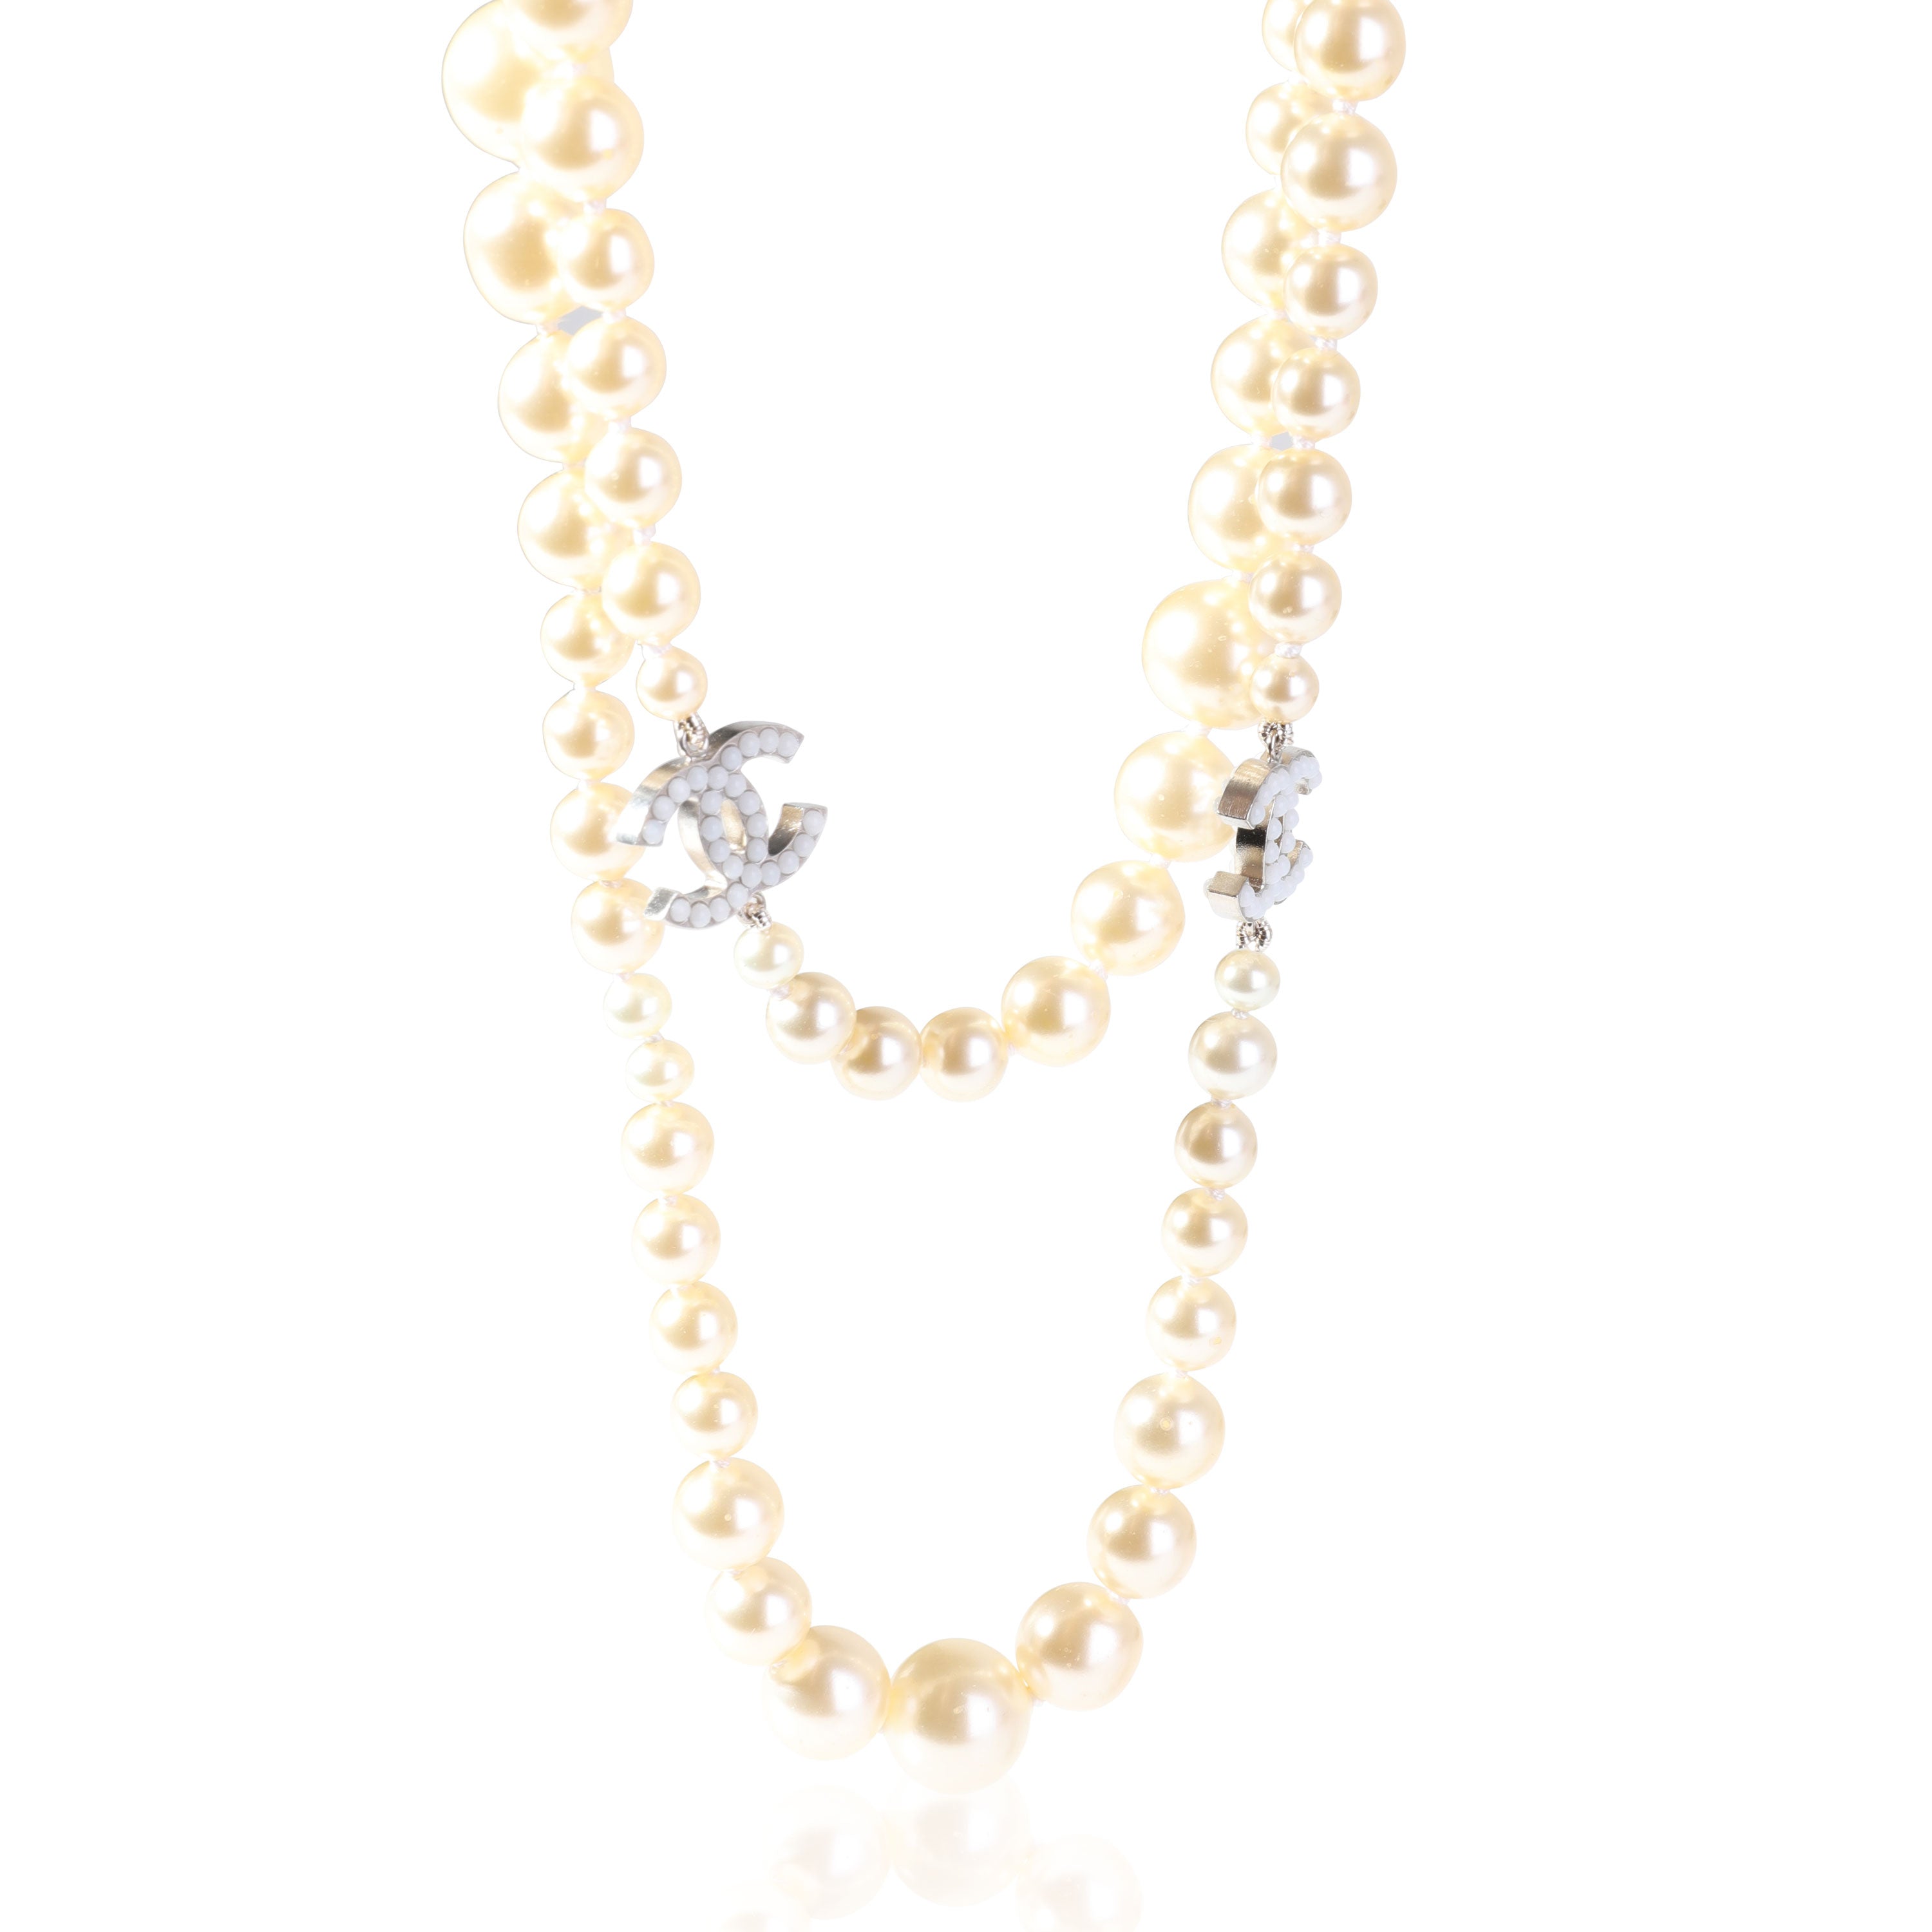 Chanel Faux Pearl Continuous 2008 Collection by Karl Lagerfeld Necklace